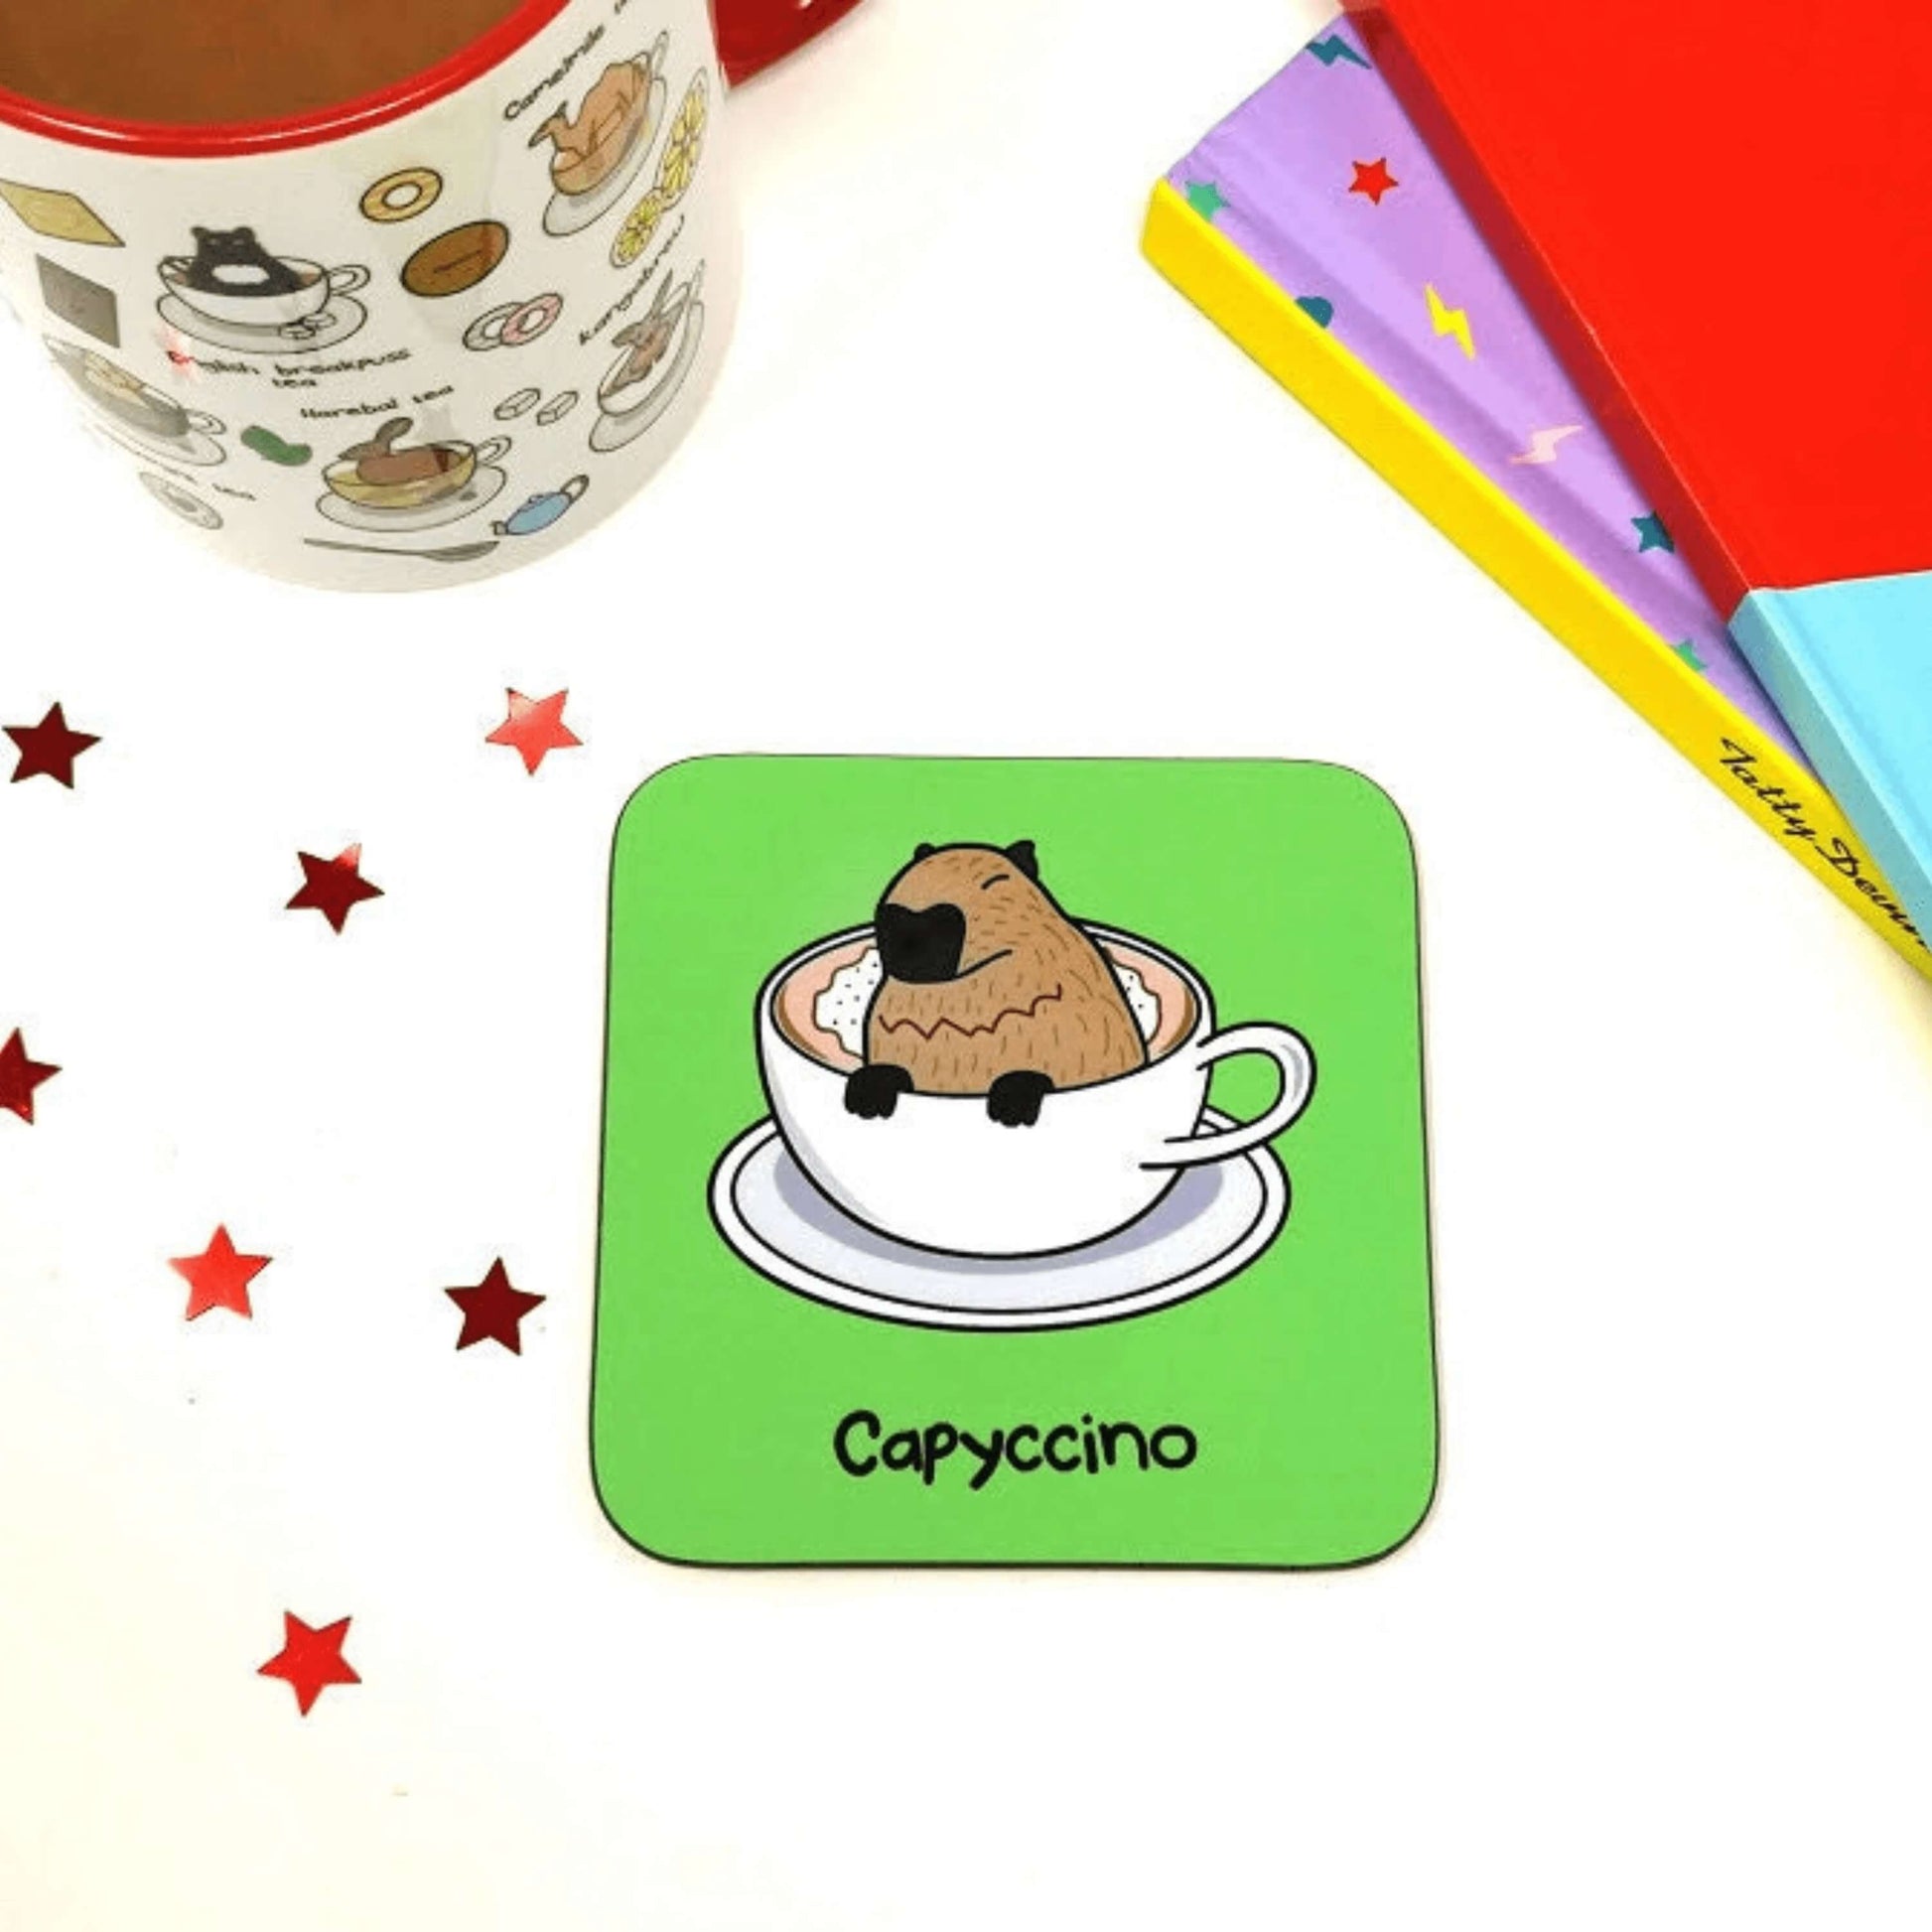 The Capyccino - Capybara Cappuccino Coaster on a white table with an innabox mug, red star sequins and colourful books. The wooden green coaster features a cute brown capybara sat peeking over a cappuccino in a white mug and saucer, underneath reads capyccino in black.